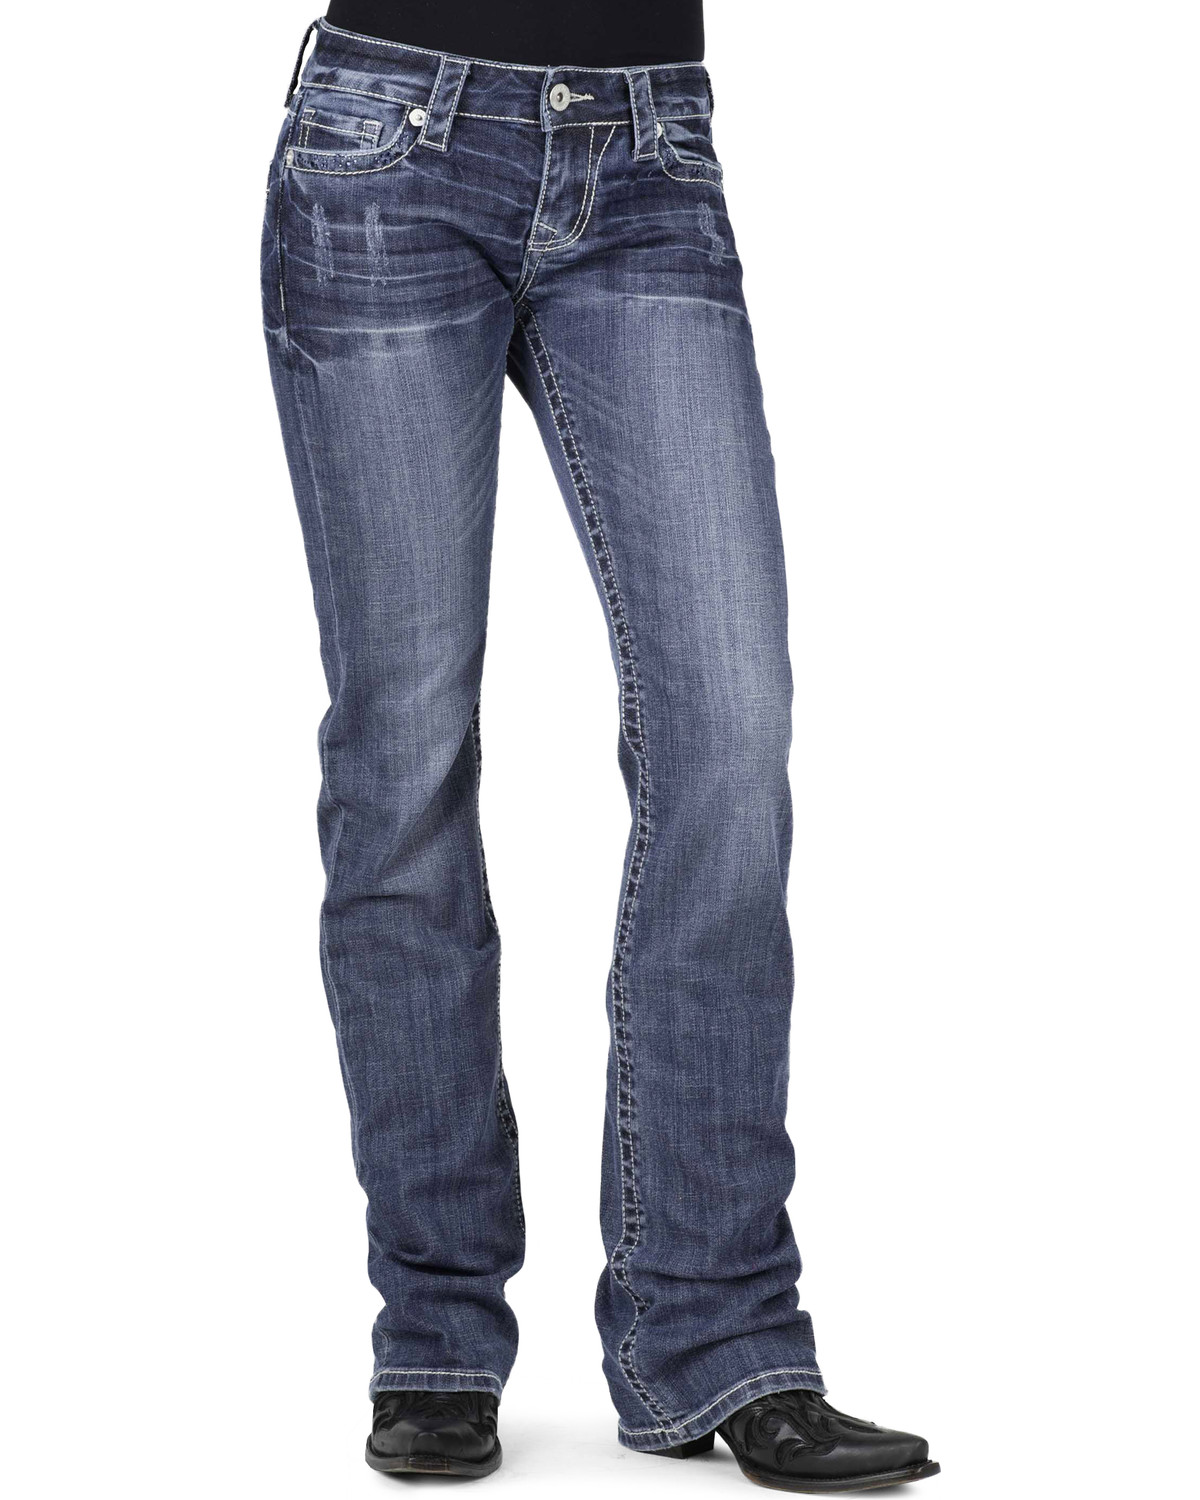 Stetson Women's Hollywood Boot Cut Jeans | Boot Barn